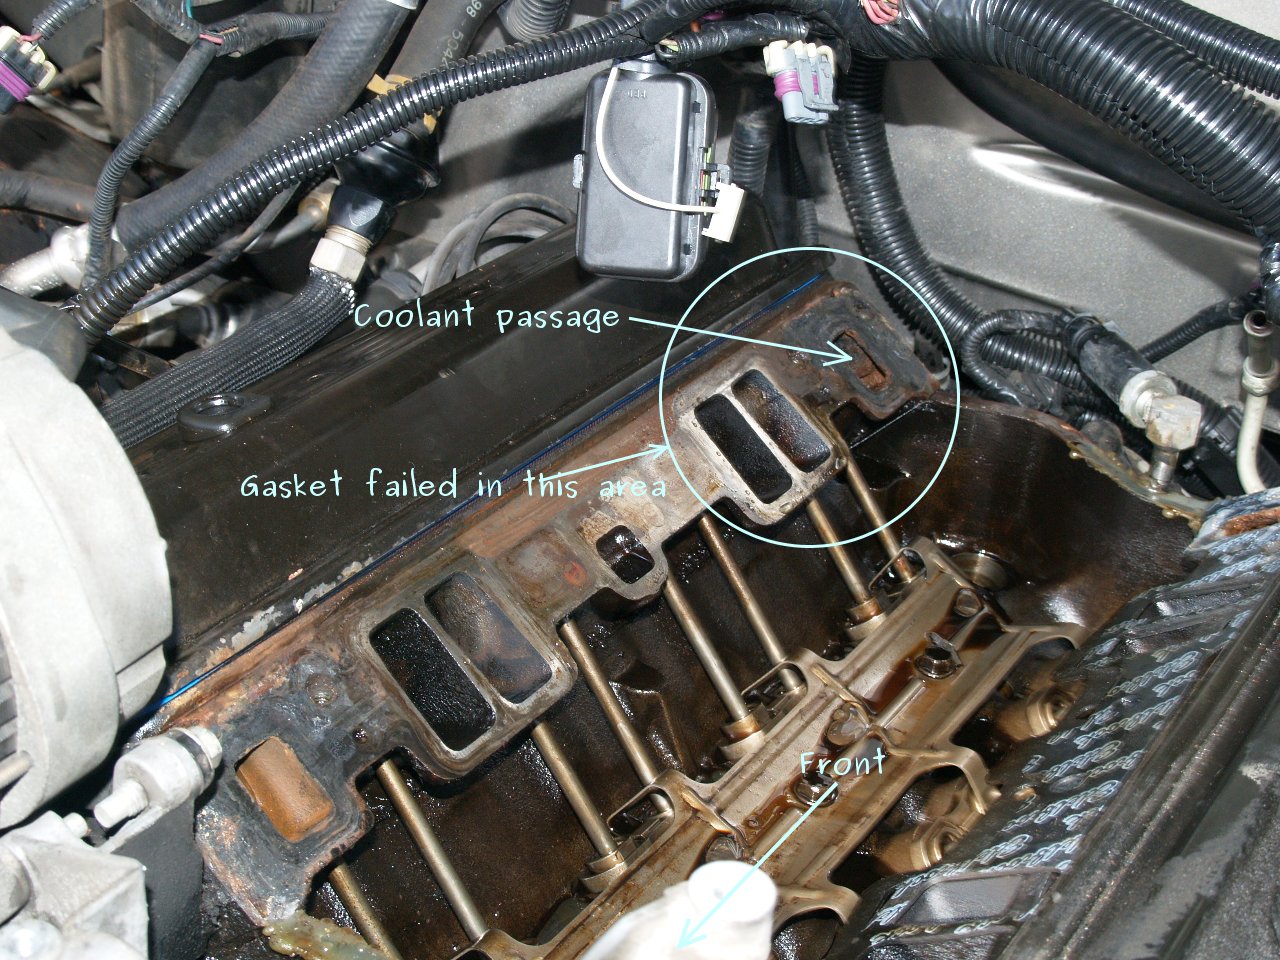 See P0945 in engine